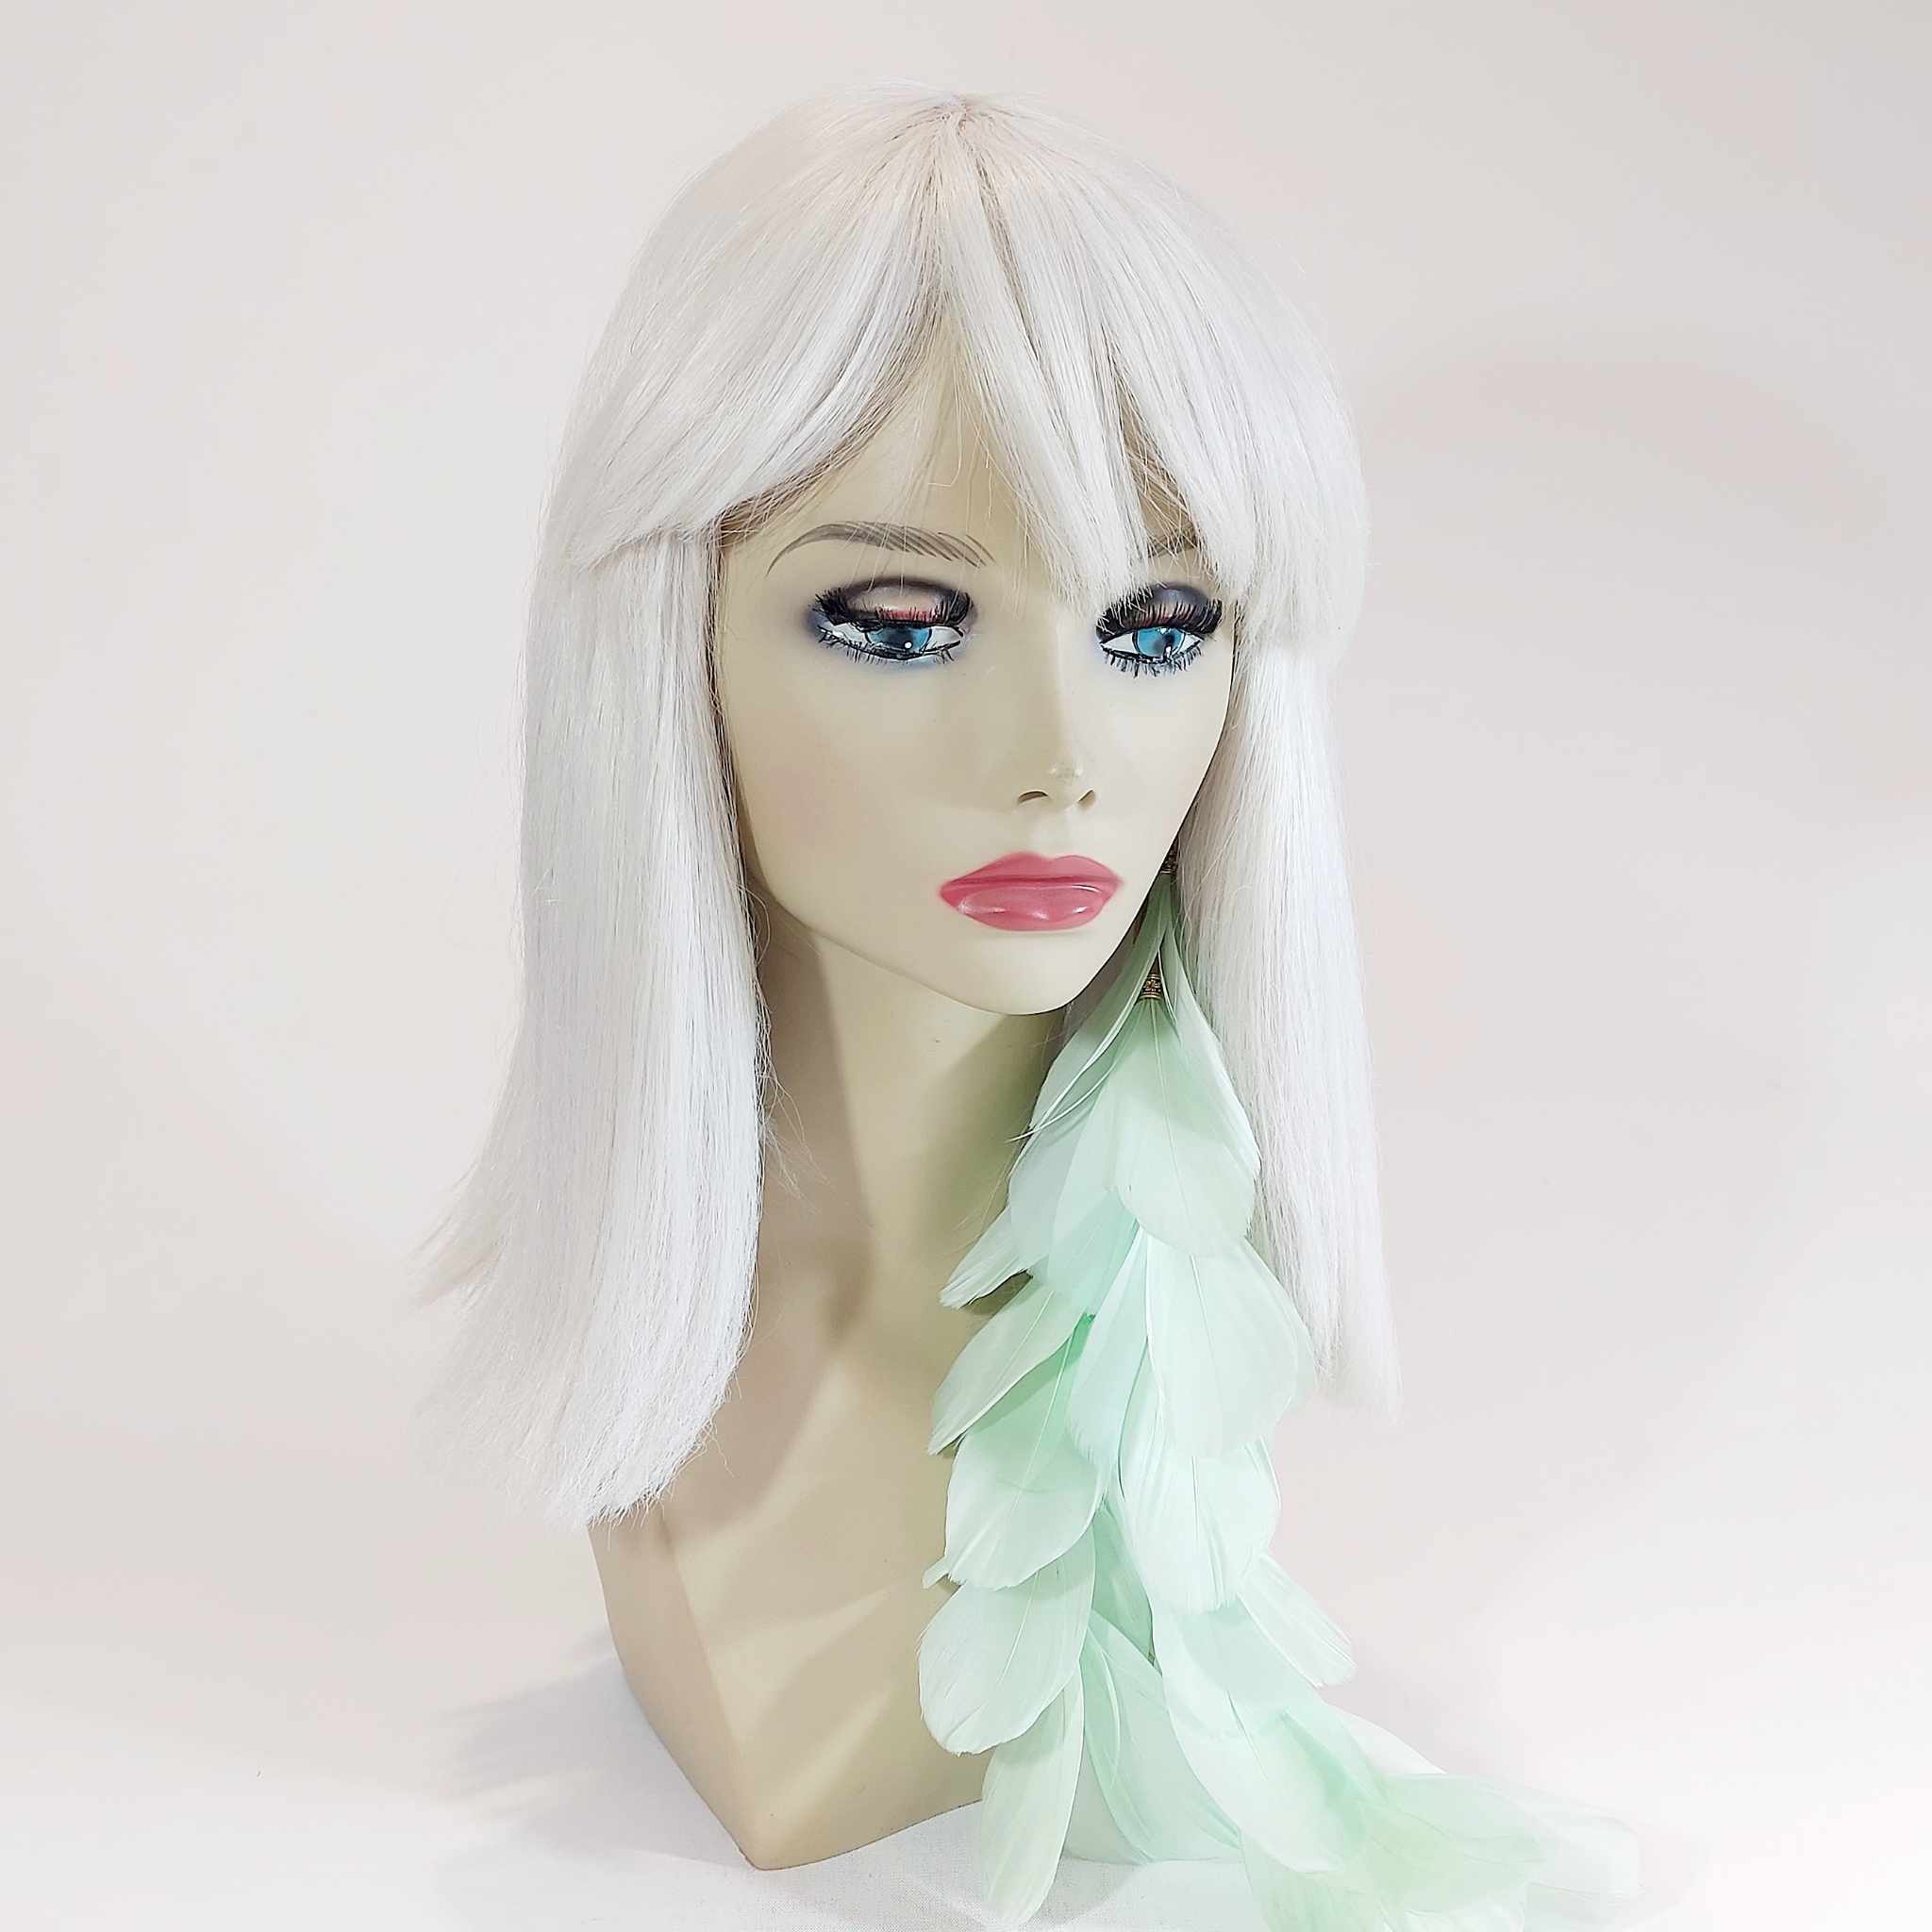 wear divalicious feather hair clip in mint to festivals